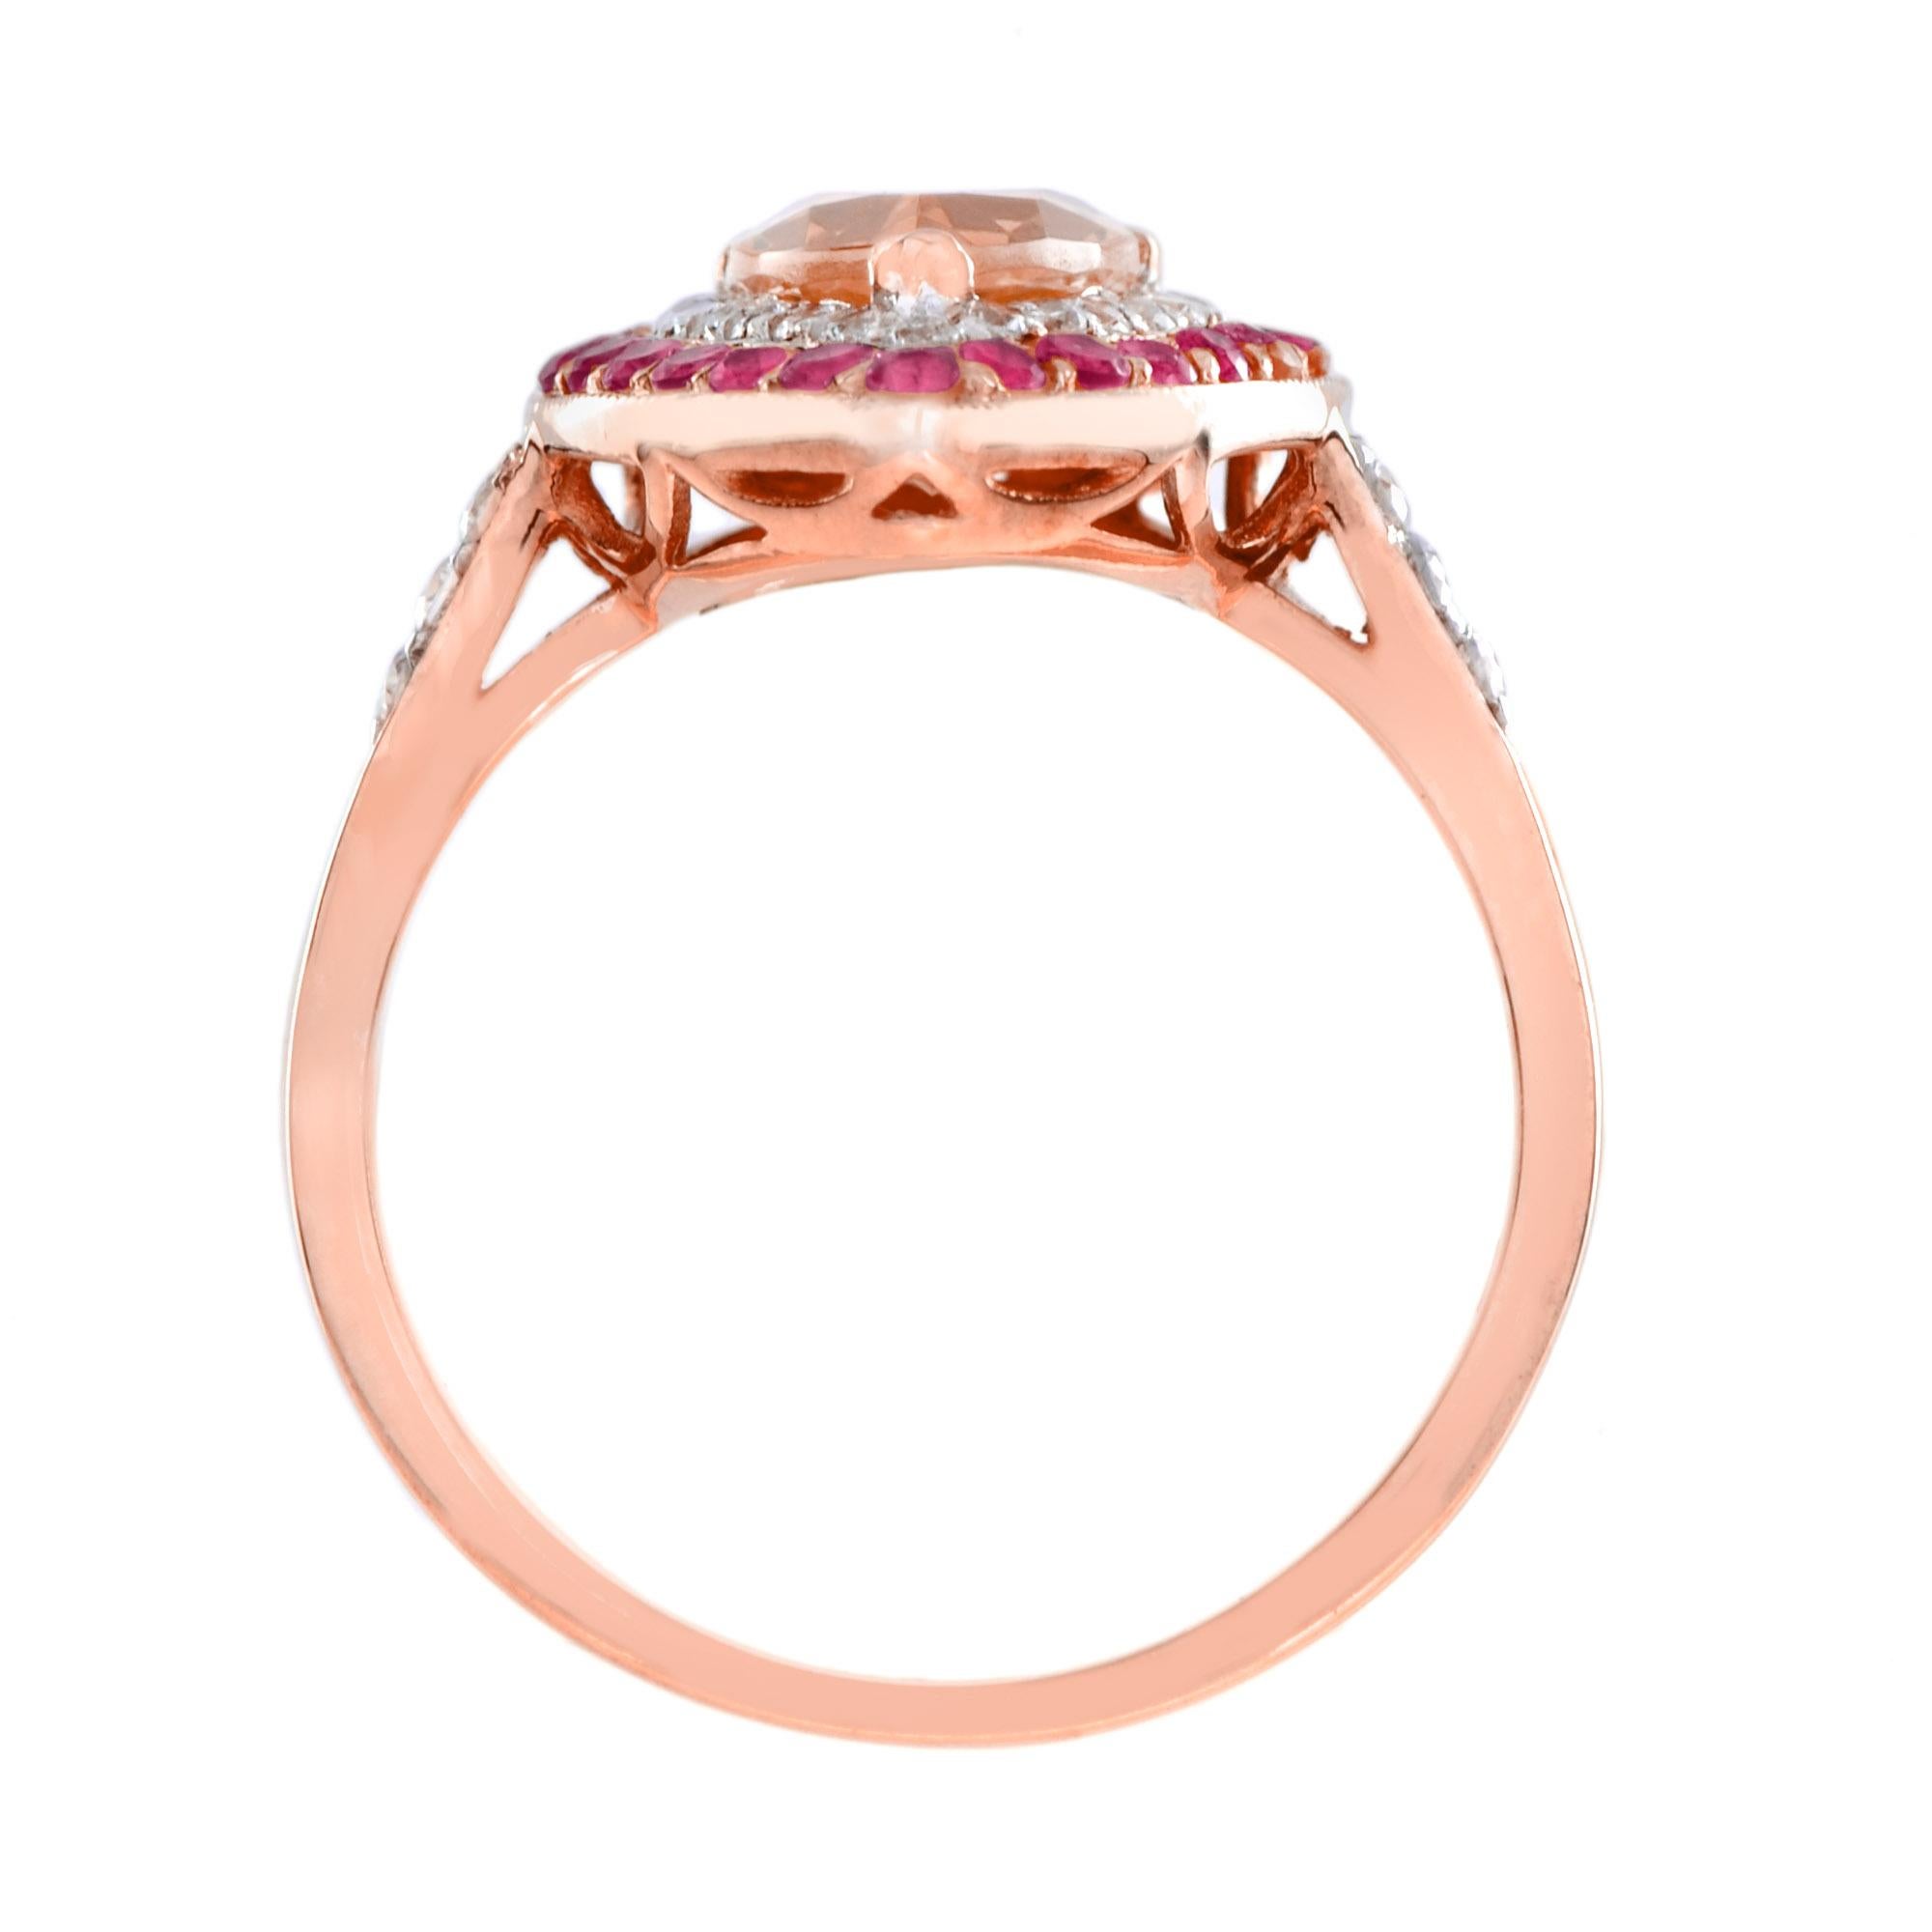 For Sale:  Morganite Diamond Ruby Pear Shaped Halo  Engagement Ring in 14K Rose Gold 6